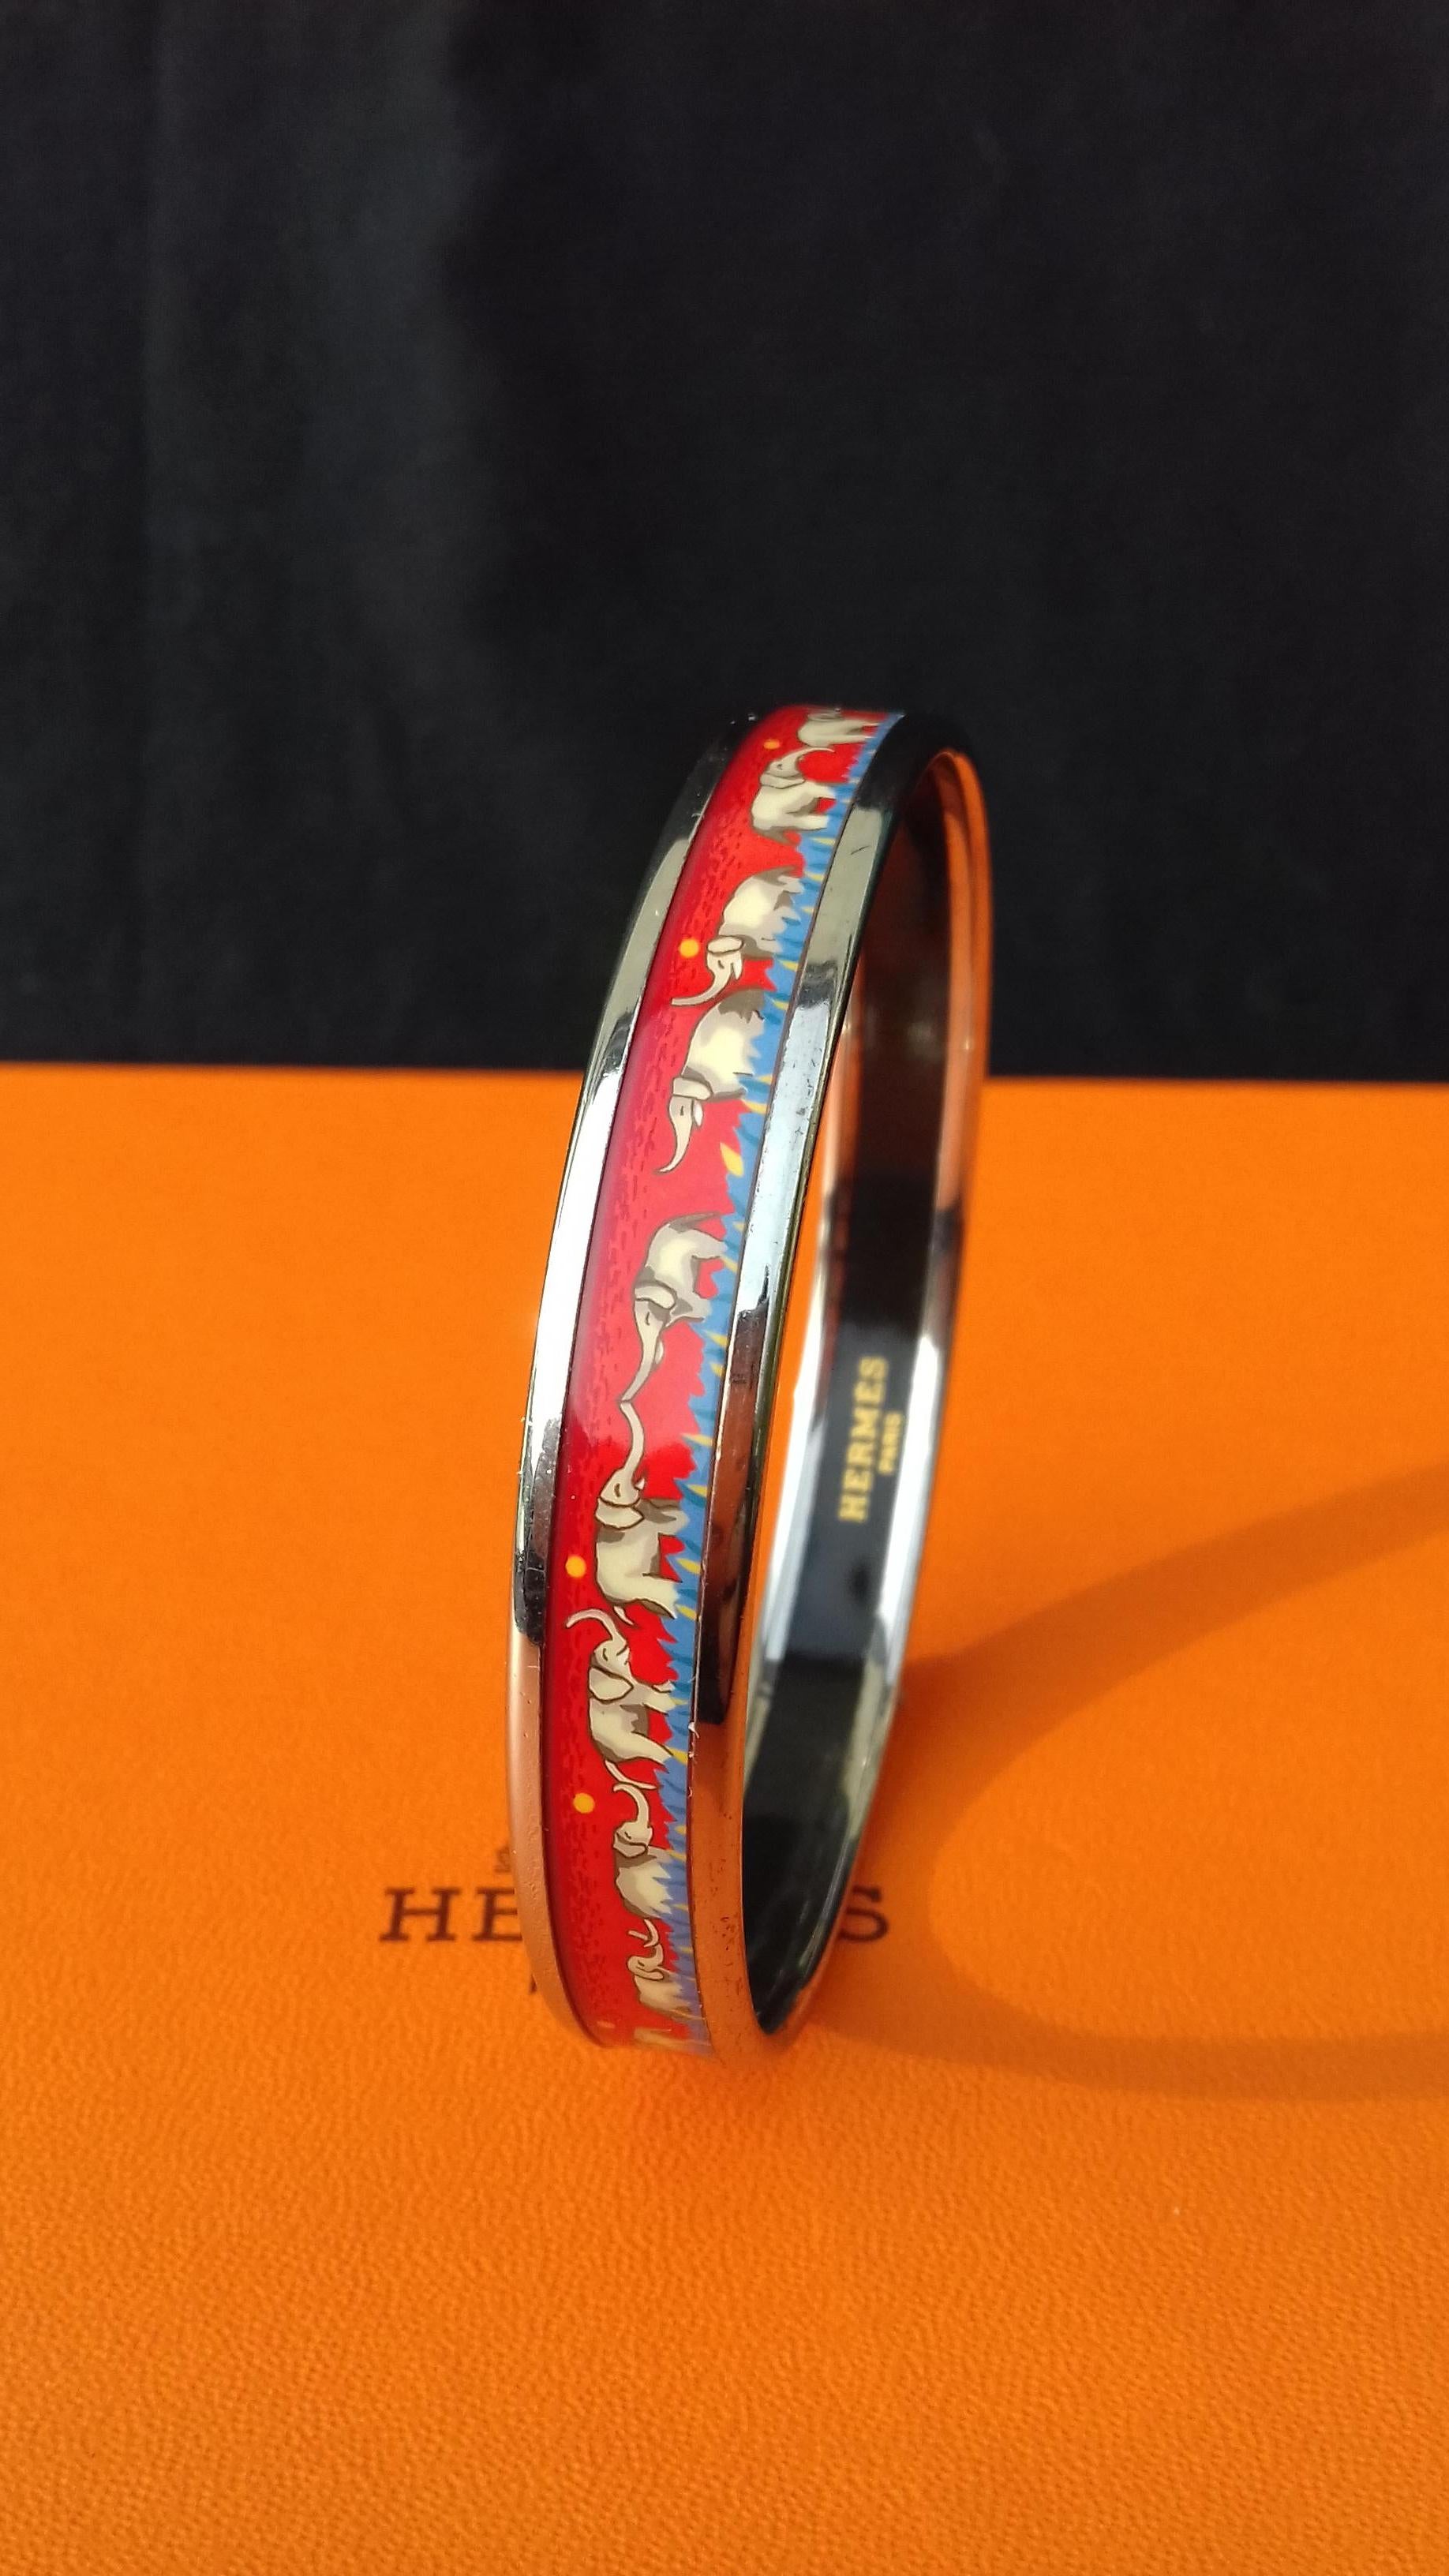 Gorgeous Authentic Hermès Bracelet

Pattern: Elephants Grazing

Hard to find ! One of the most thought after Hermès Bracelet

Made in Austria + L

Made of printed Enamel and Palladium Plated Hardware (silver-tone)

Colorways: Red background and